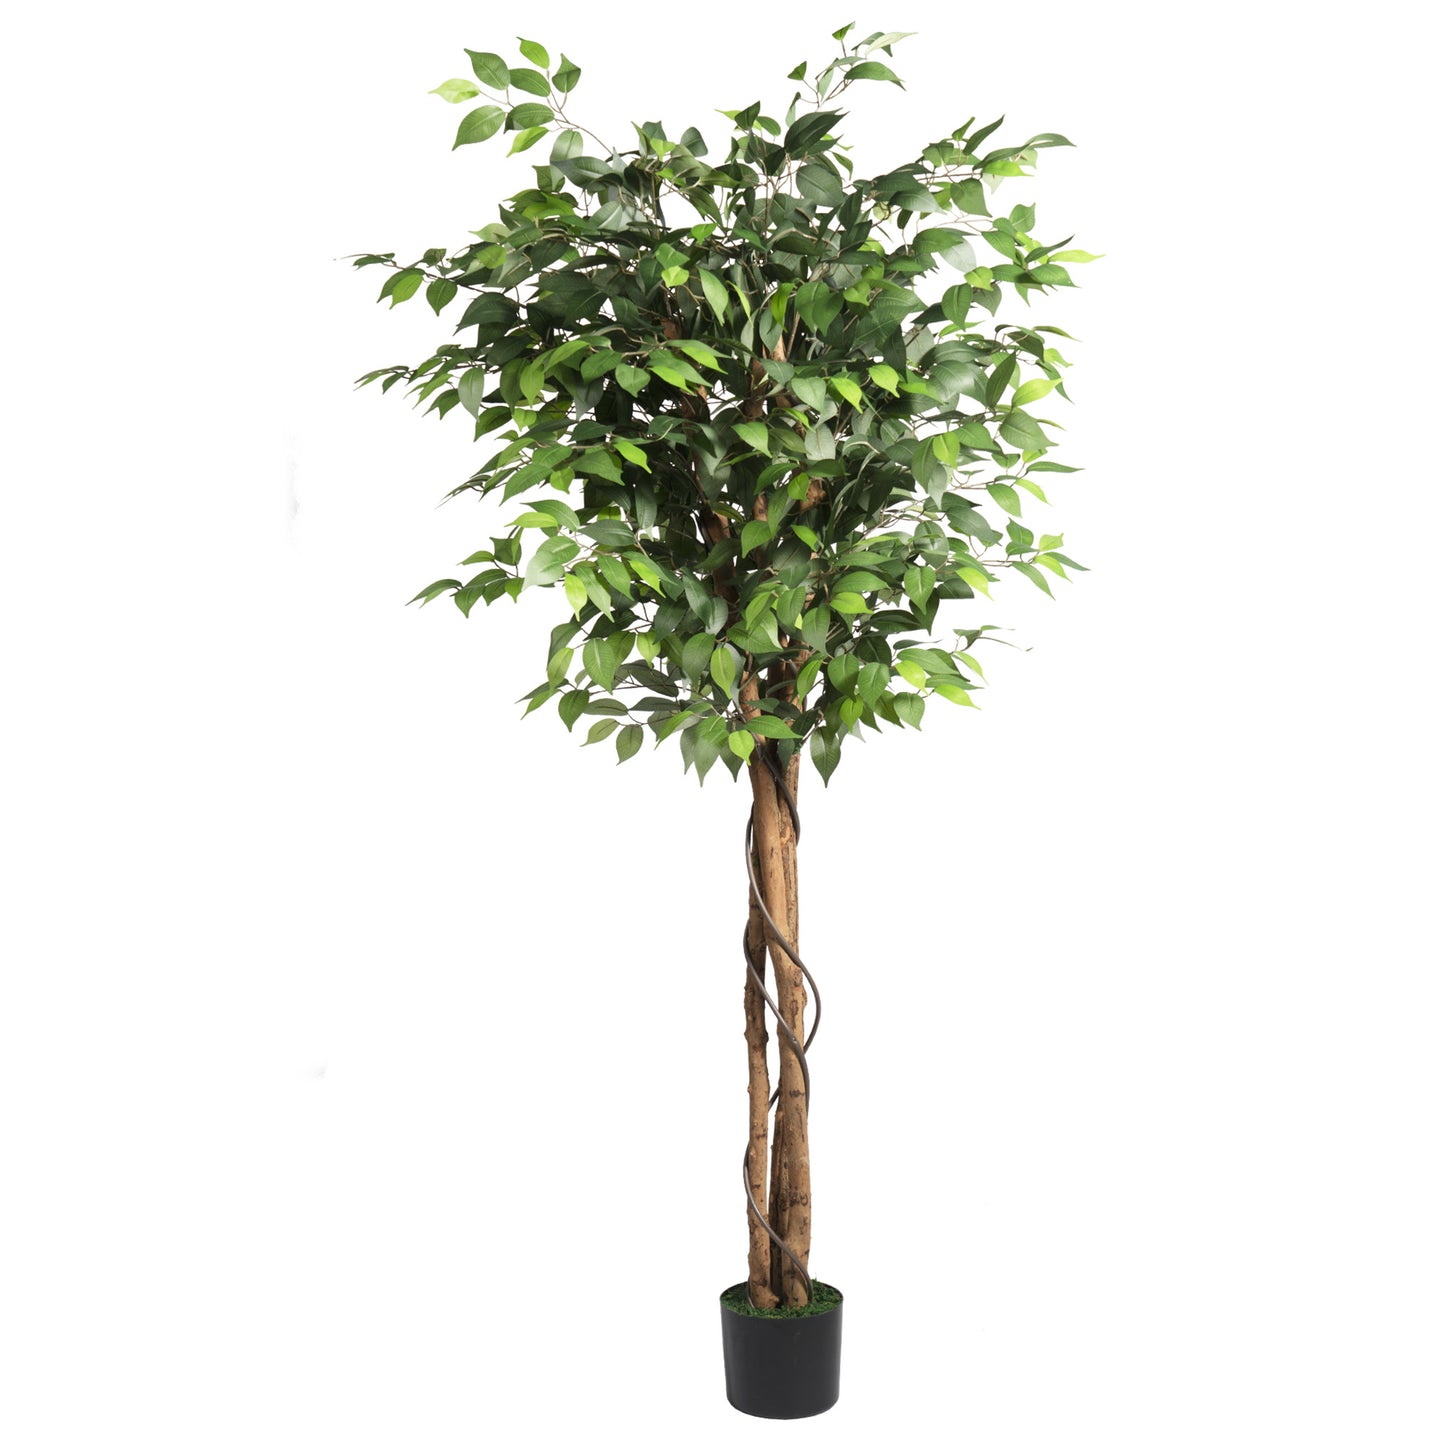 Artificial Ficus Tree 71in - Faux Indoor Tree for Home Decor, Evergreen 6-Feet Tall Fake Tree Plant, Fake Floor Plant with Sturdy Plastic Nursery Pot for Living Room, Farmhouse, Office